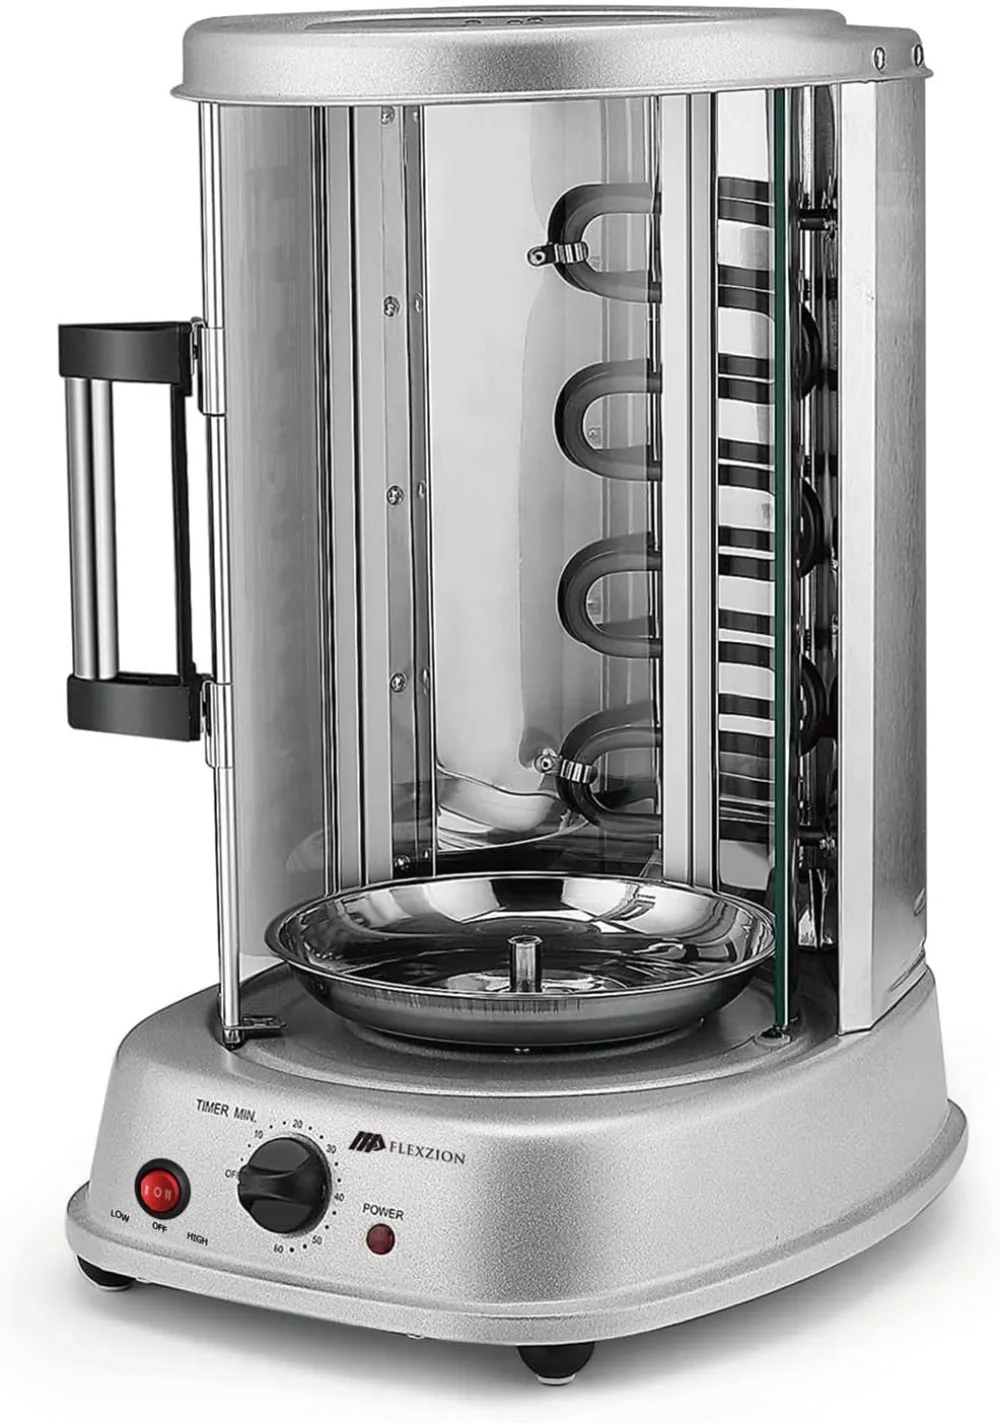 

Flexzion Vertical Rotisserie Oven Grill - Countertop Shawarma Machine Kebab Electric Cooker Rotating Oven, Stainless Steel